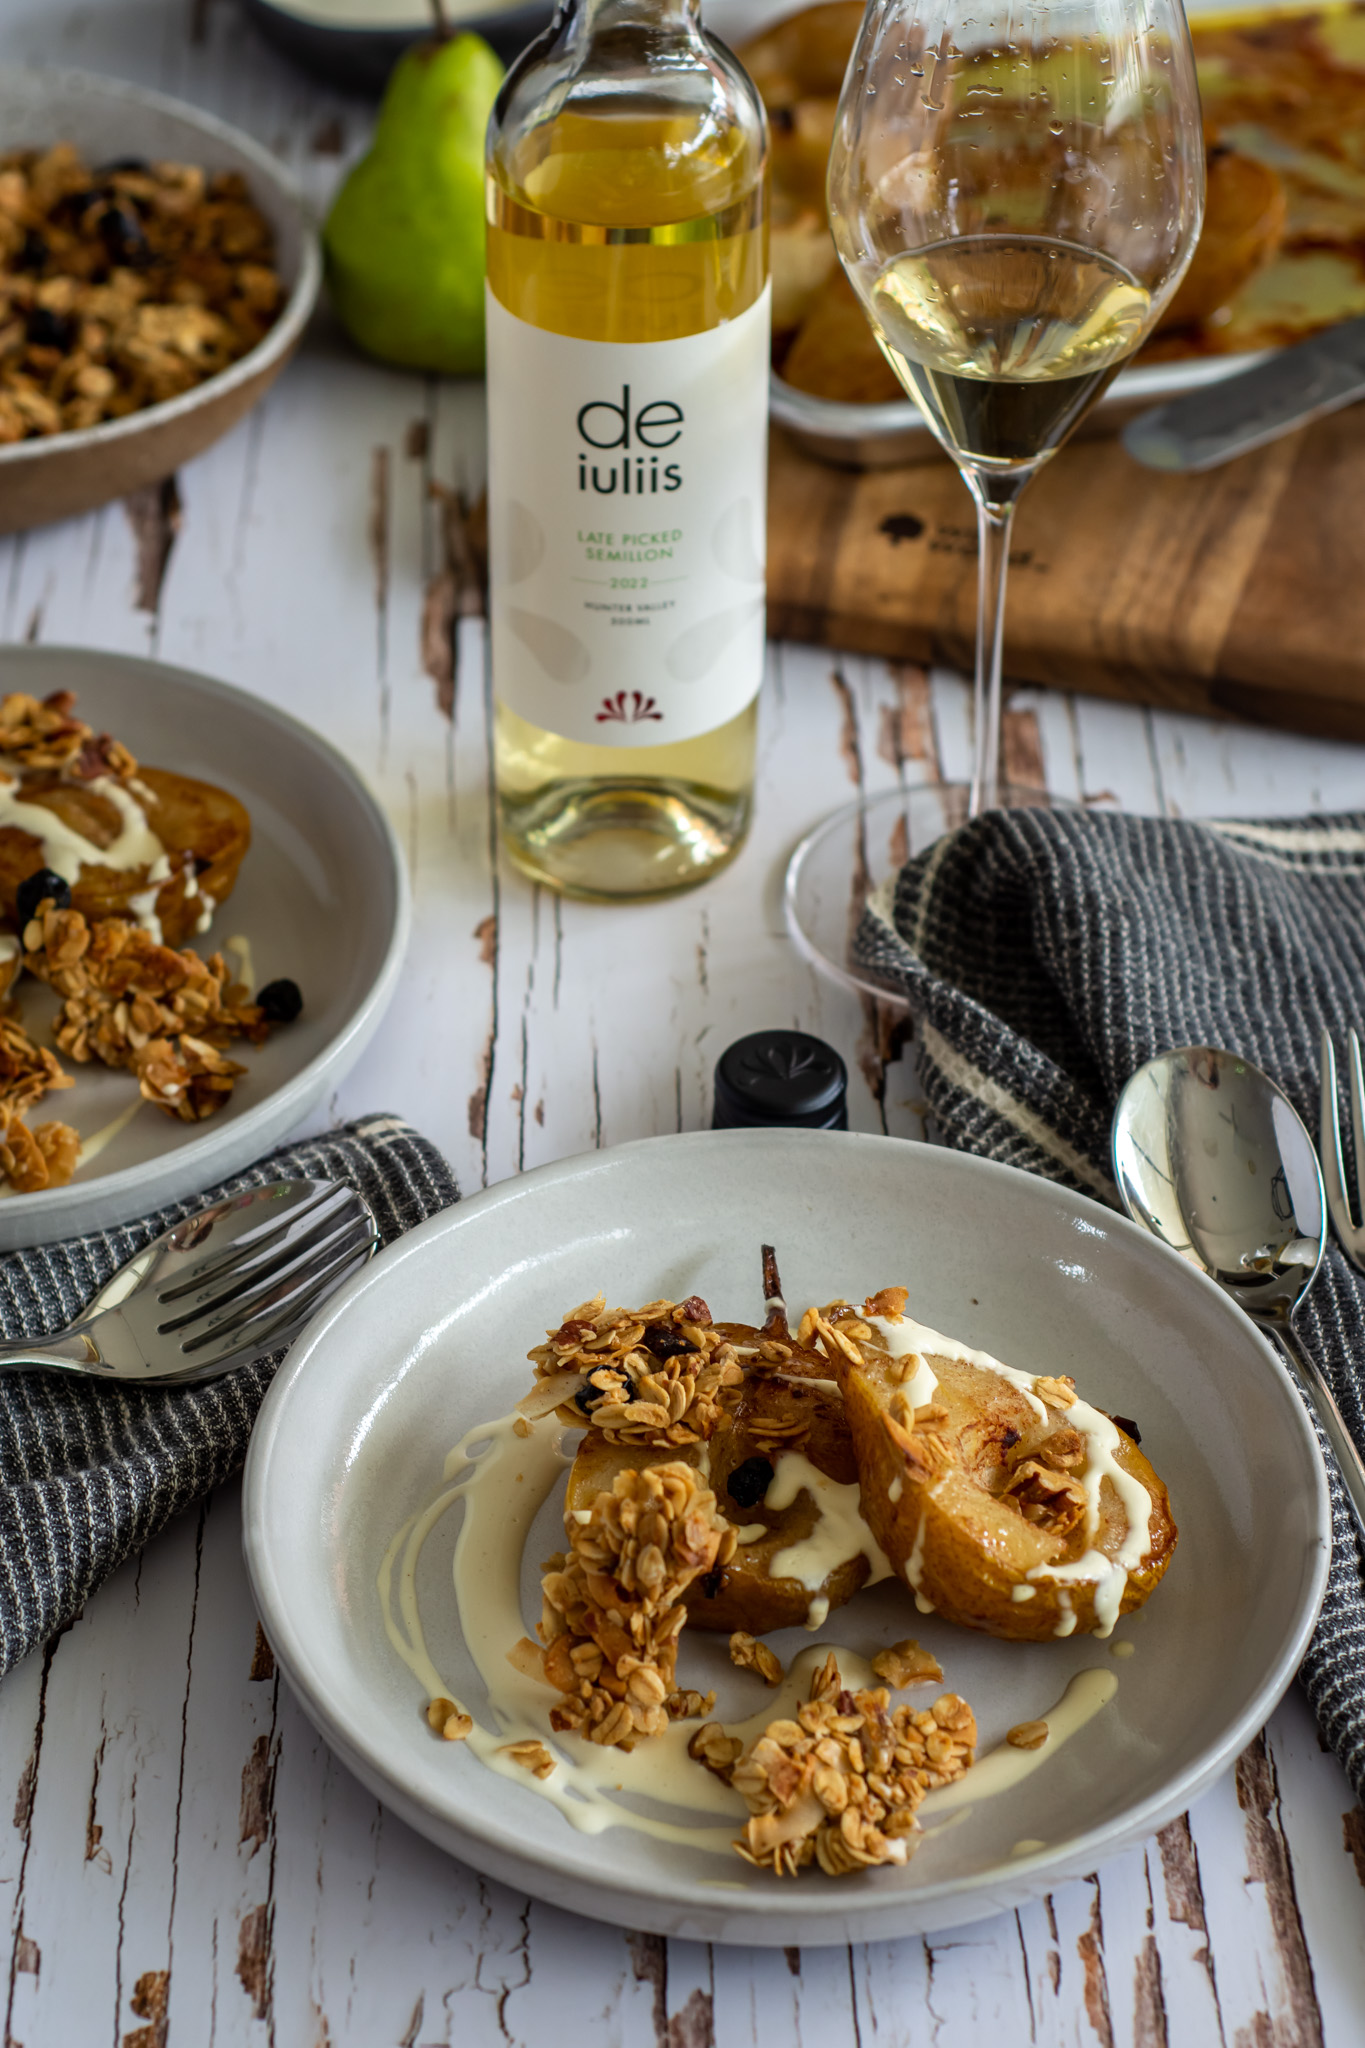 Late Picked Semillon with Spiced Pears, Chunky Granola & Ginger Crème Fraiche